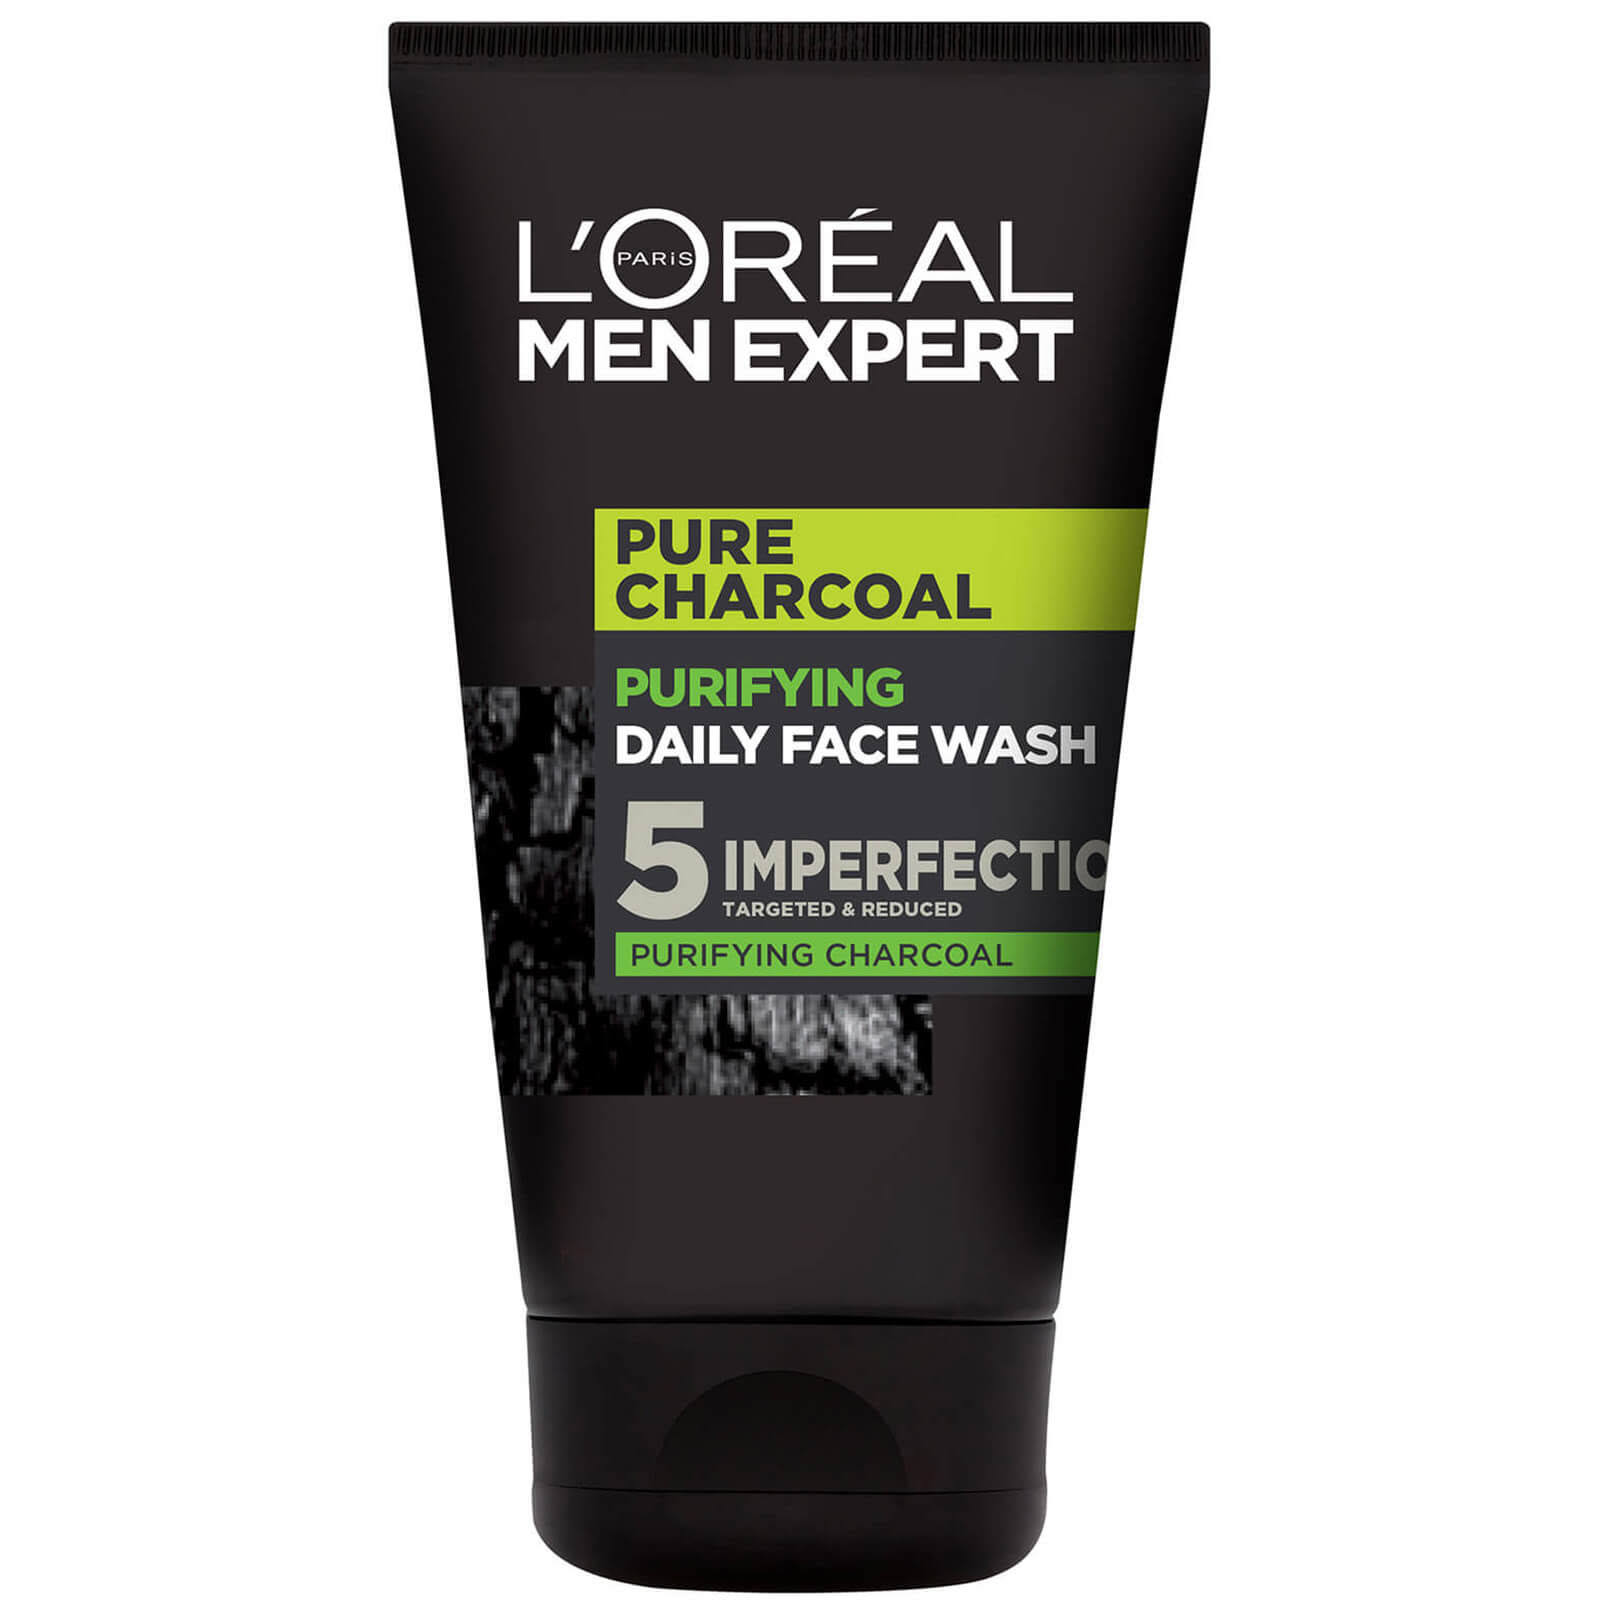 L'oreal Men Expert Pure Charcoal Purifying Daily Face Wash - 100ml